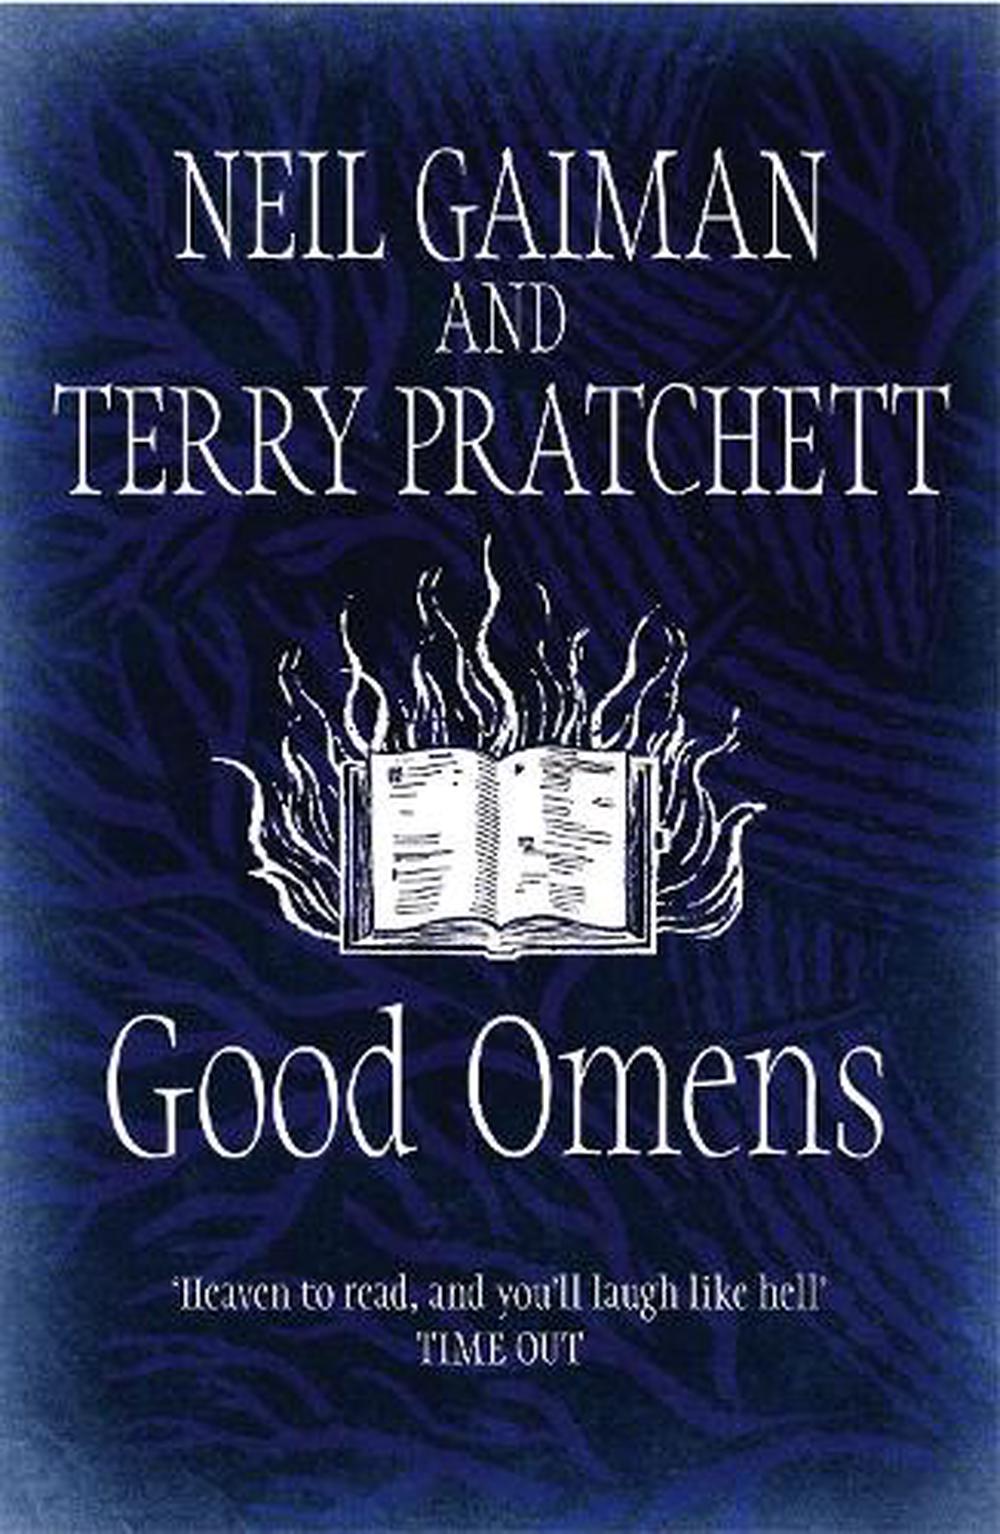 Good Omens By Neil Gaiman Hardcover 9781473214712 Buy Online At The Nile 8947